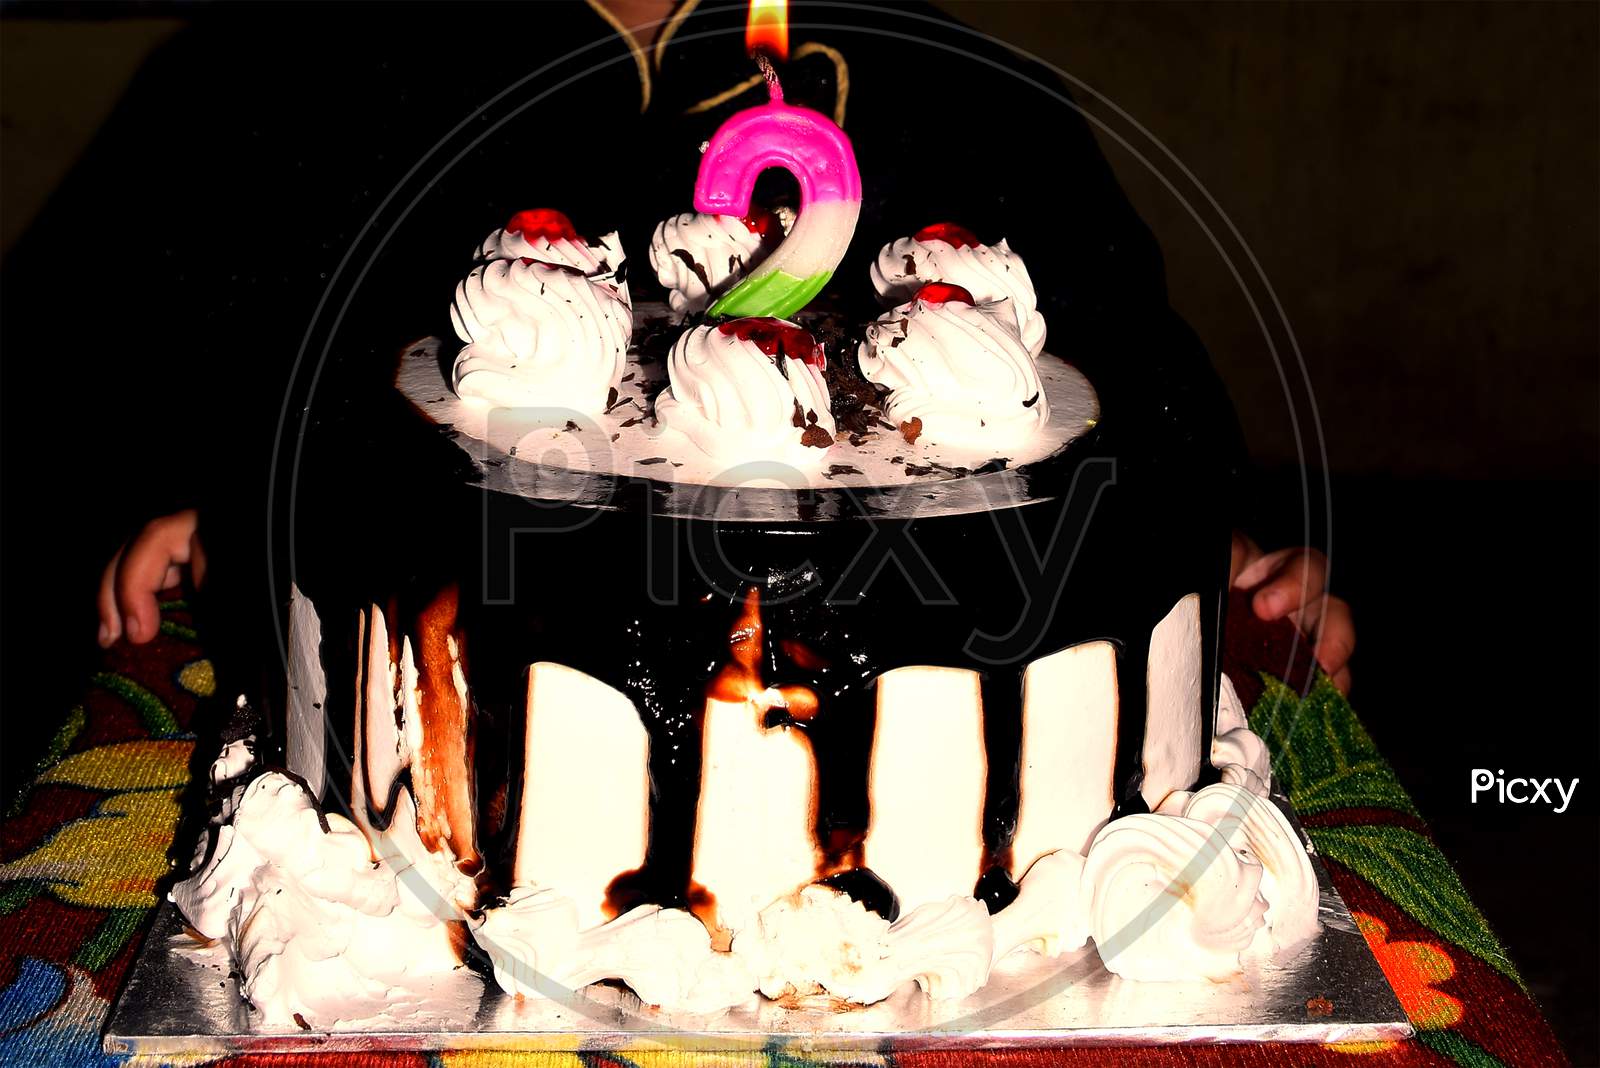 Birthday Drip Cake And Burning Candle With Chocolate And Sprinkles Isolated Black Background Banner With Party Decor. Celebration Concept. Trendy Drip Cake